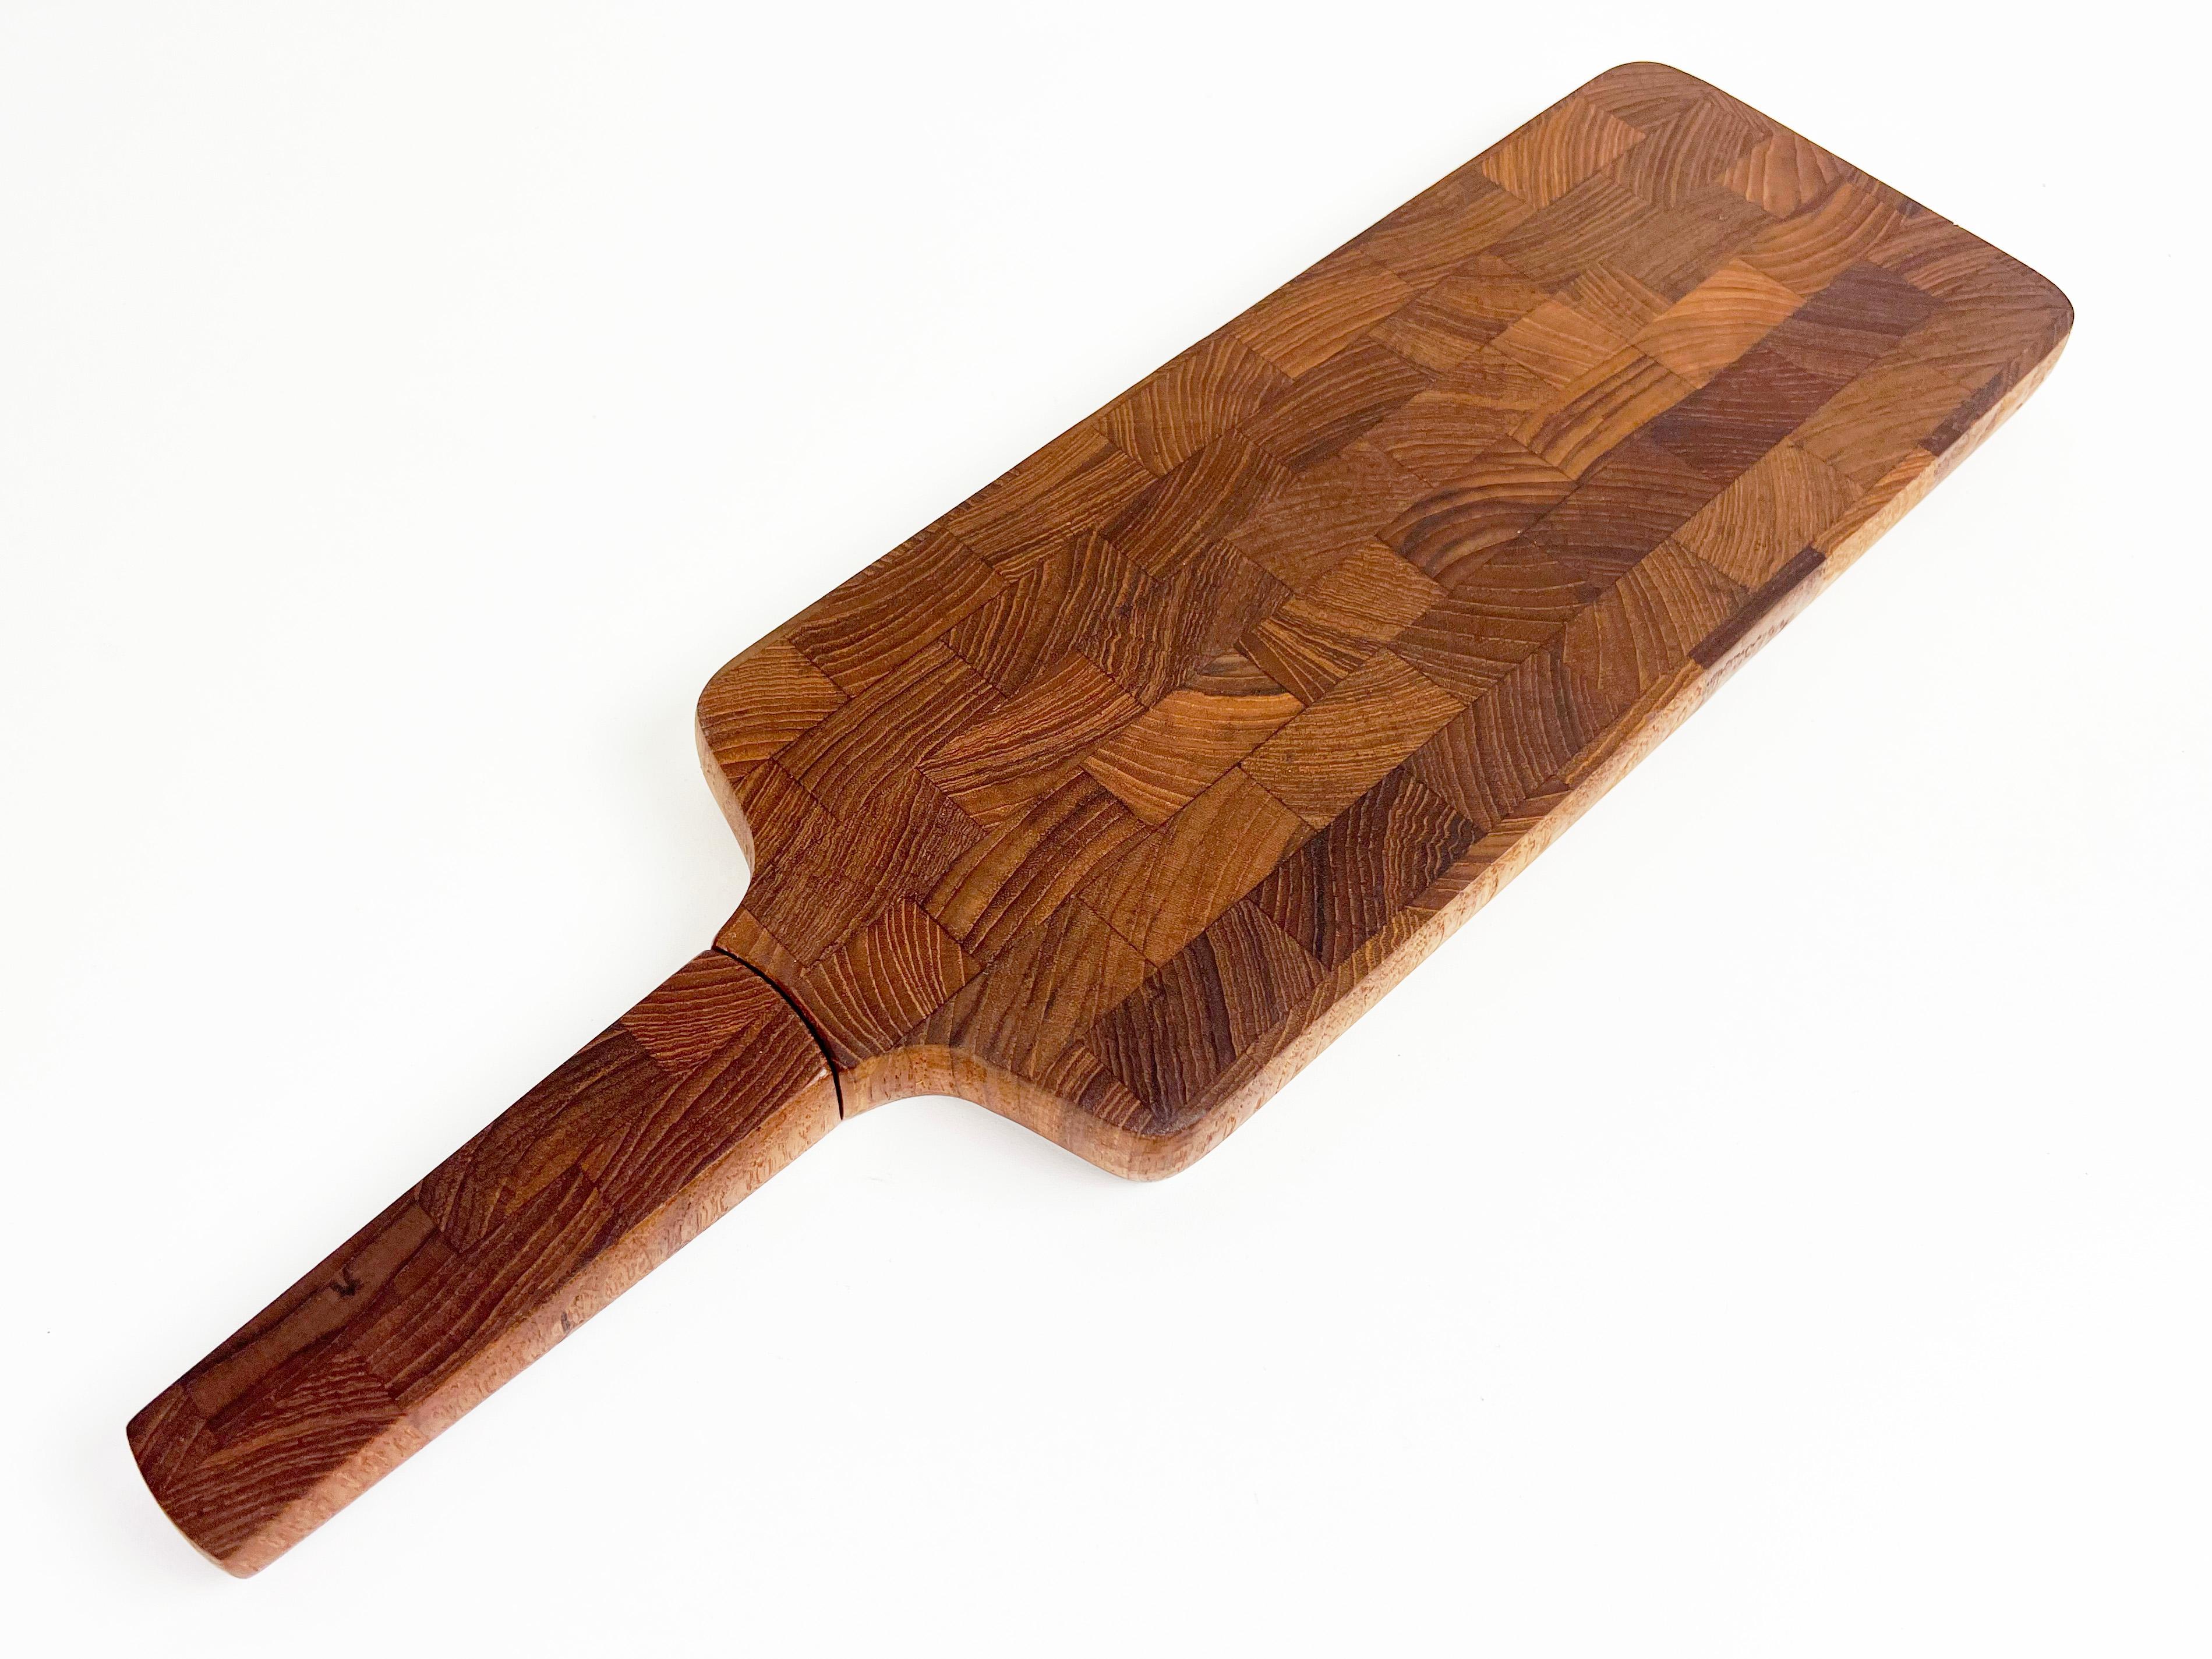 Vintage paddle shaped serving/cutting board with a built-in stainless steel serrated knife hidden in the handle. Constructed of solid end-grain teak. 

Designer: Jens Quistgaard

Manufacturer: Dansk

Dimensions: 19.25